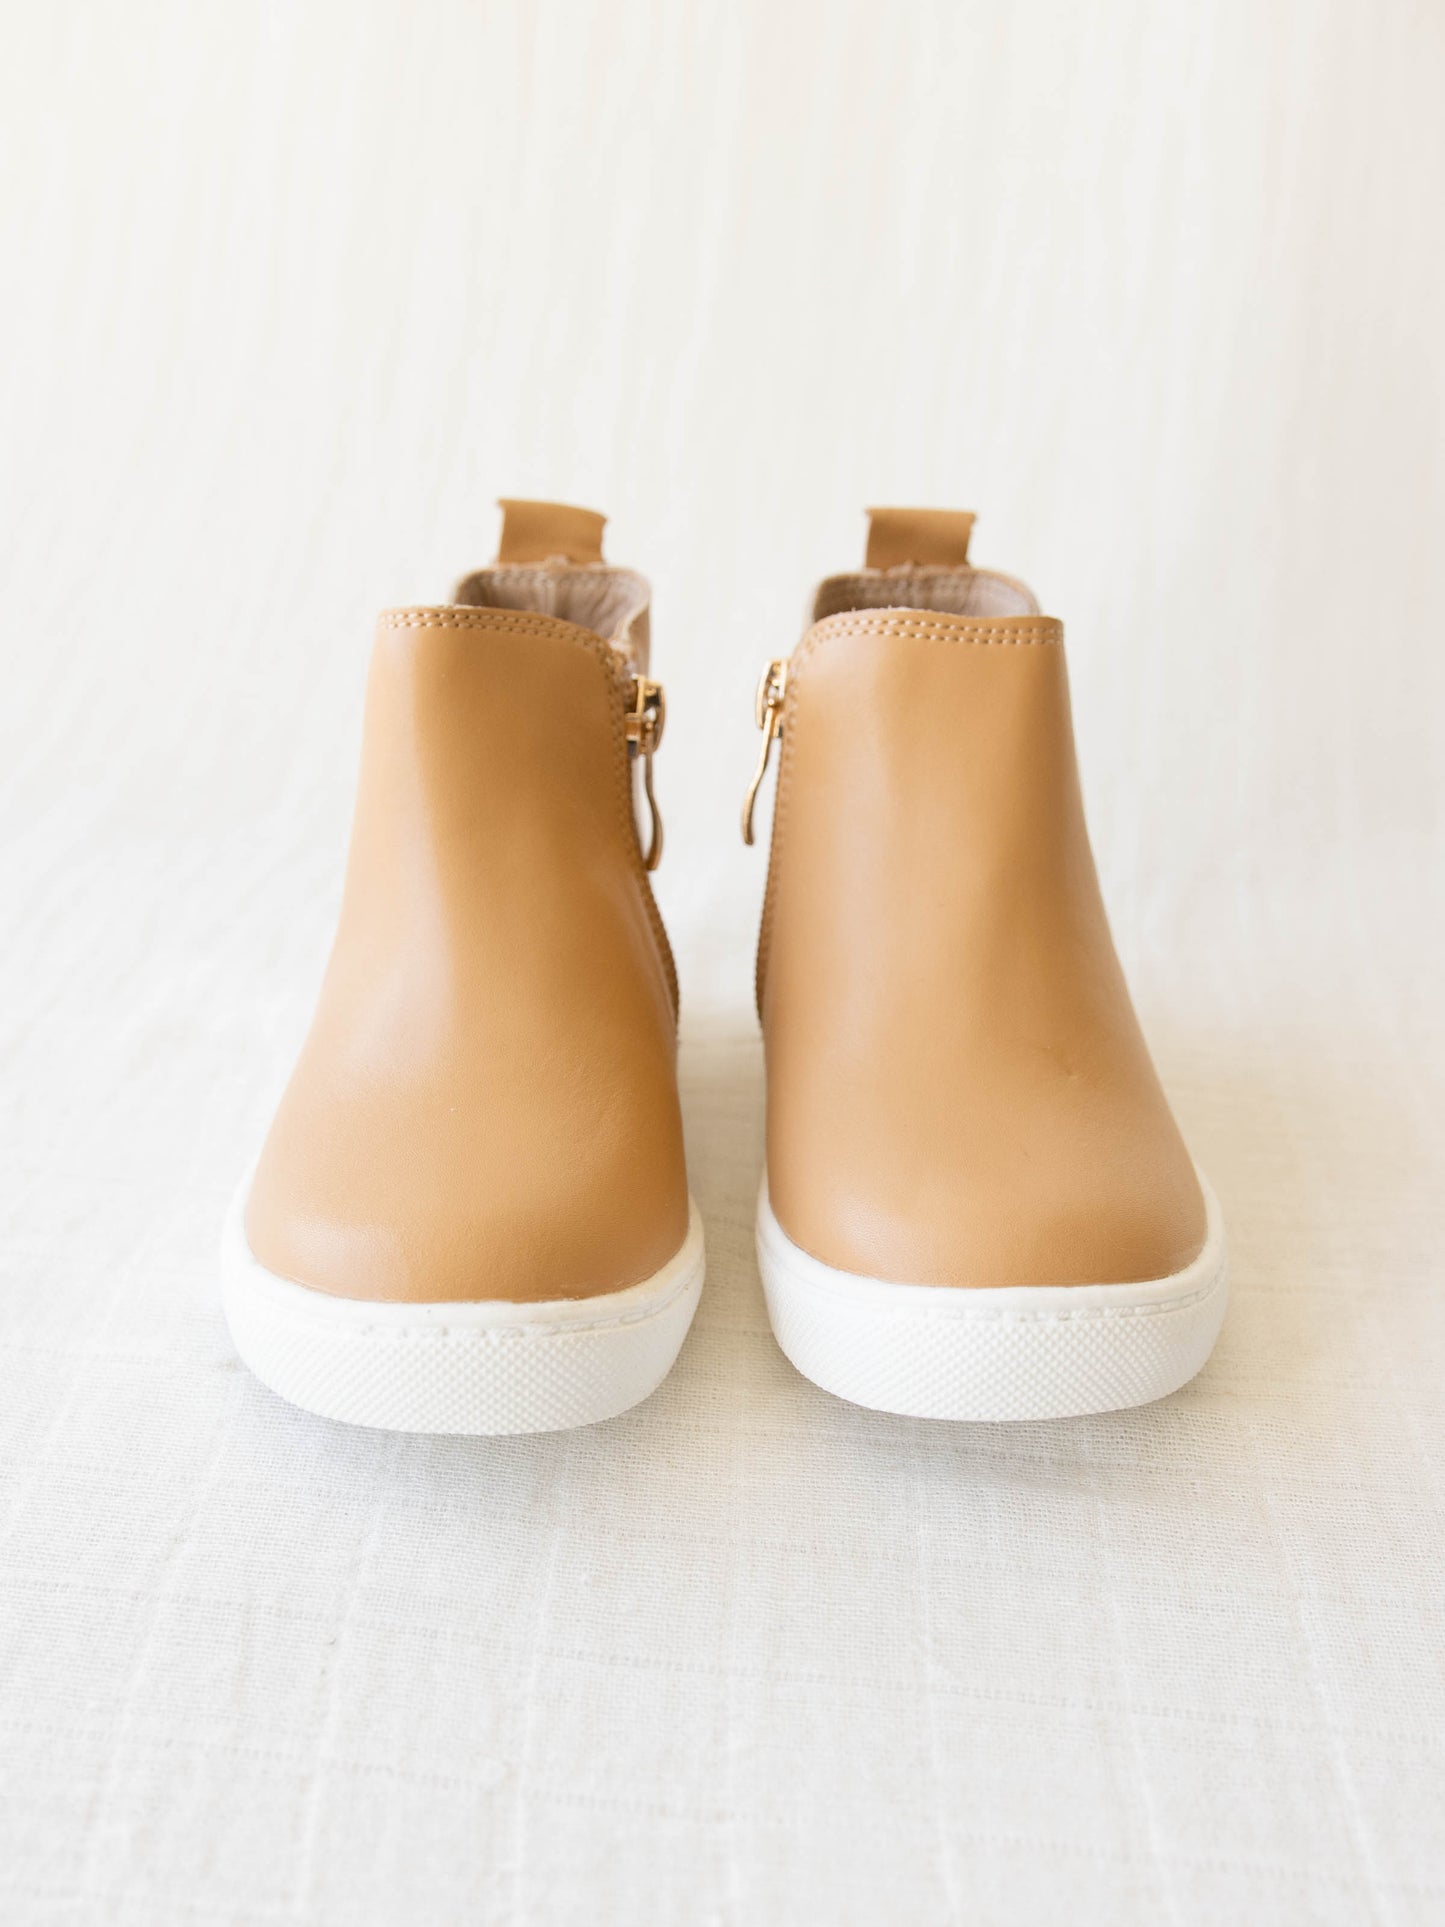 Chelsea Sneaker is a tan shoe with a side zipper on one side and some elastic on the other.